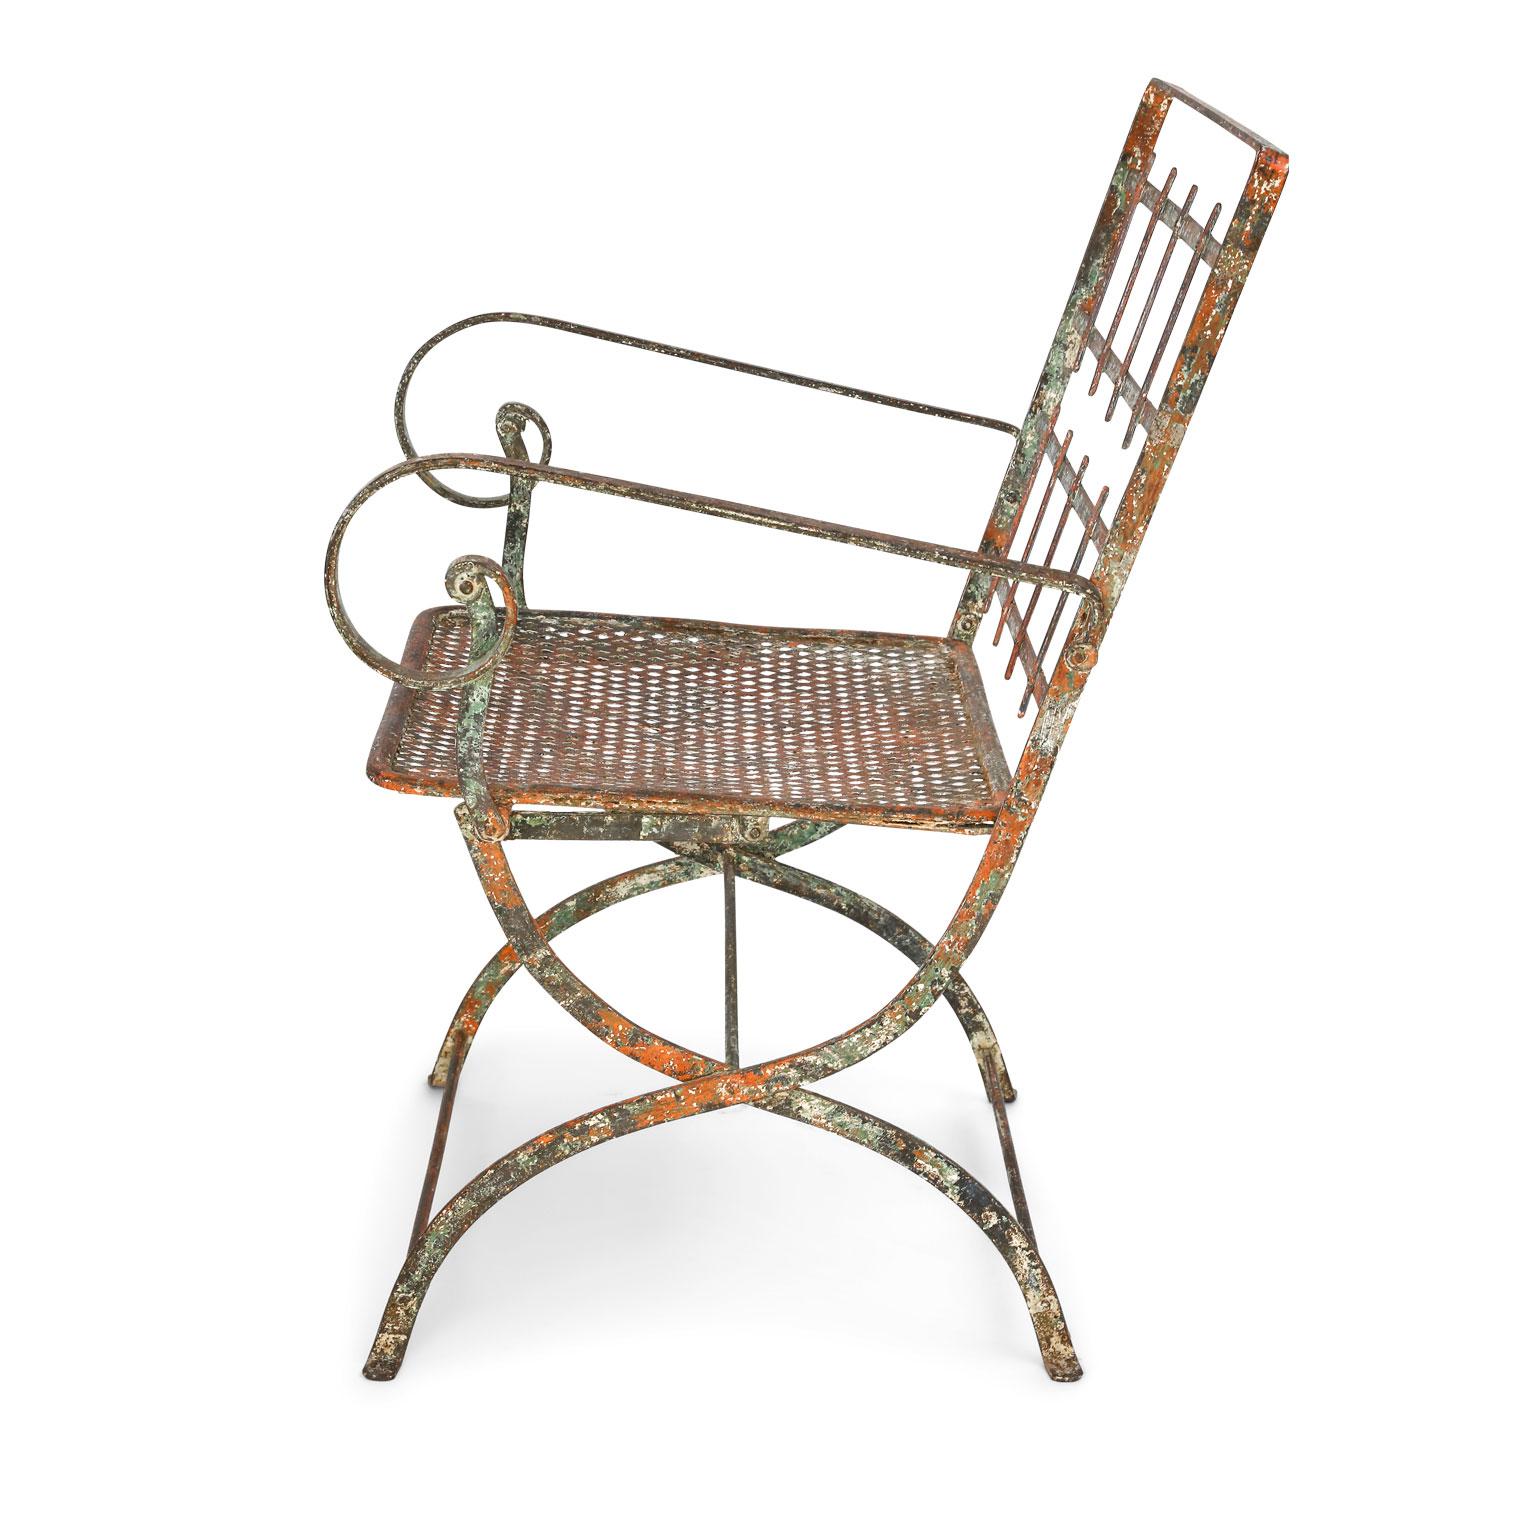 Pair of French iron garden chairs with traces of original paint, circa 1910. Chairs are sold together as a pair for $3,200.